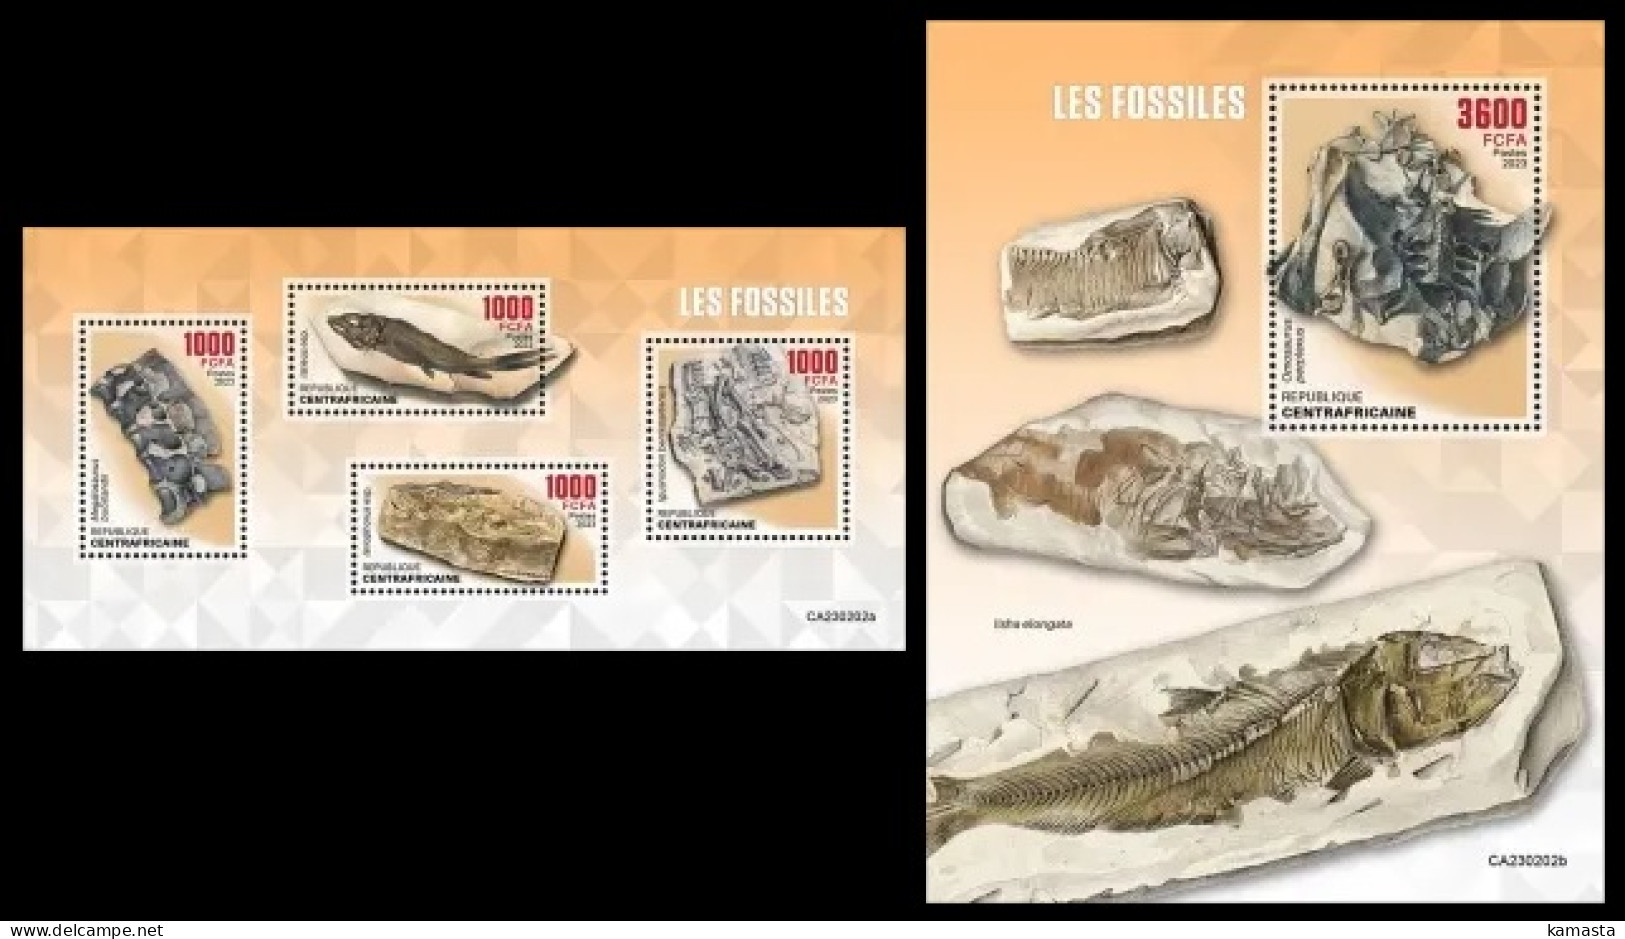 Central Africa 2023 Fossils. (202) OFFICIAL ISSUE - Fossiles